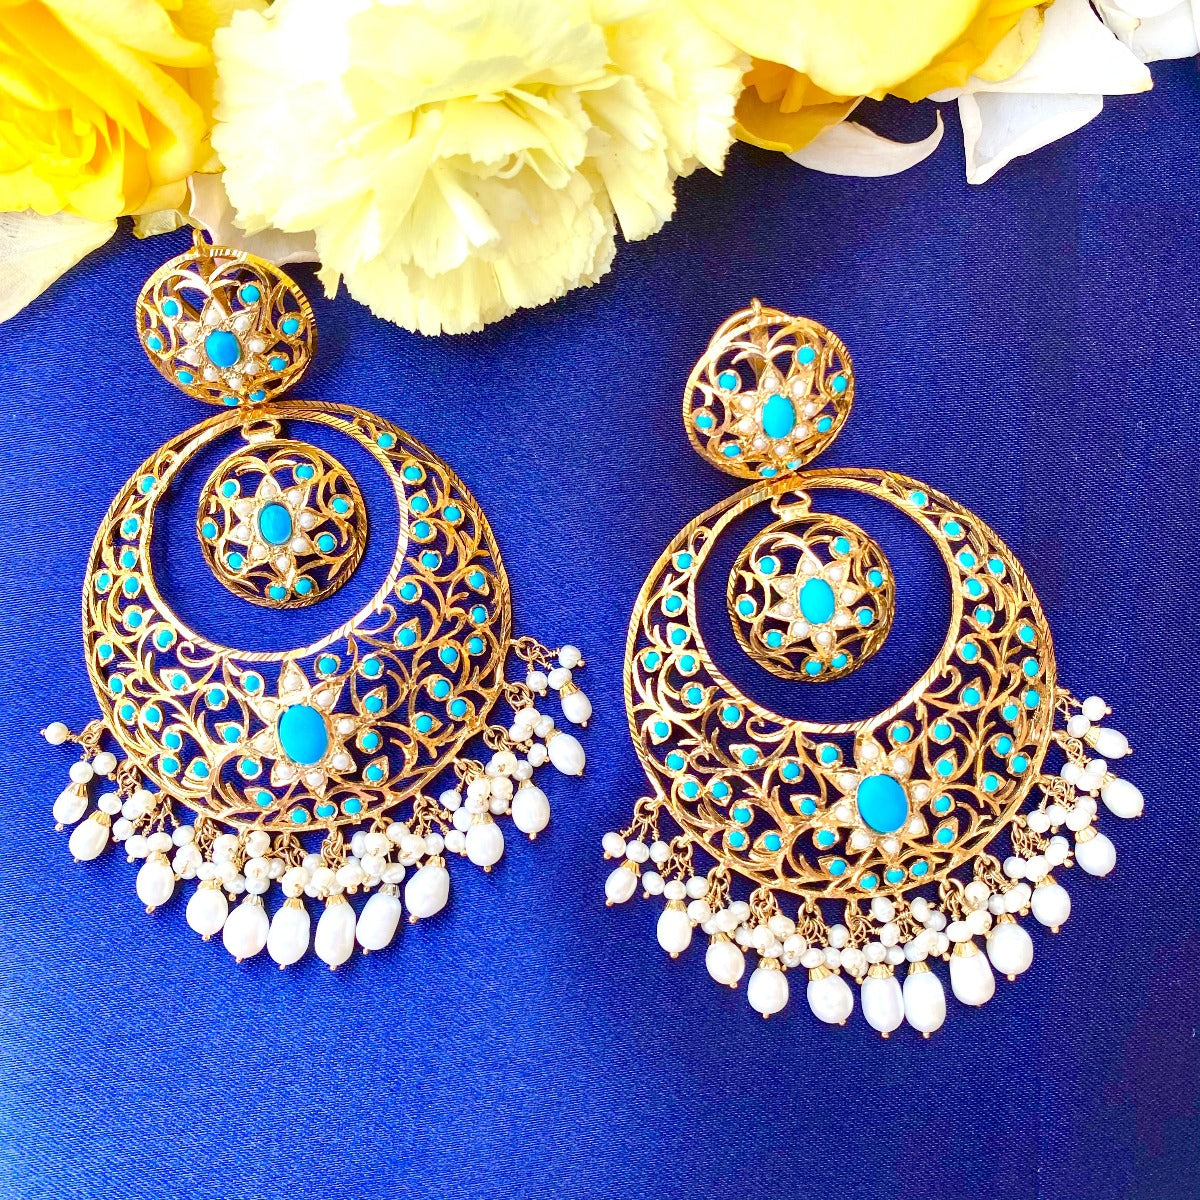 Bollywood chandbali earrings with gold plating